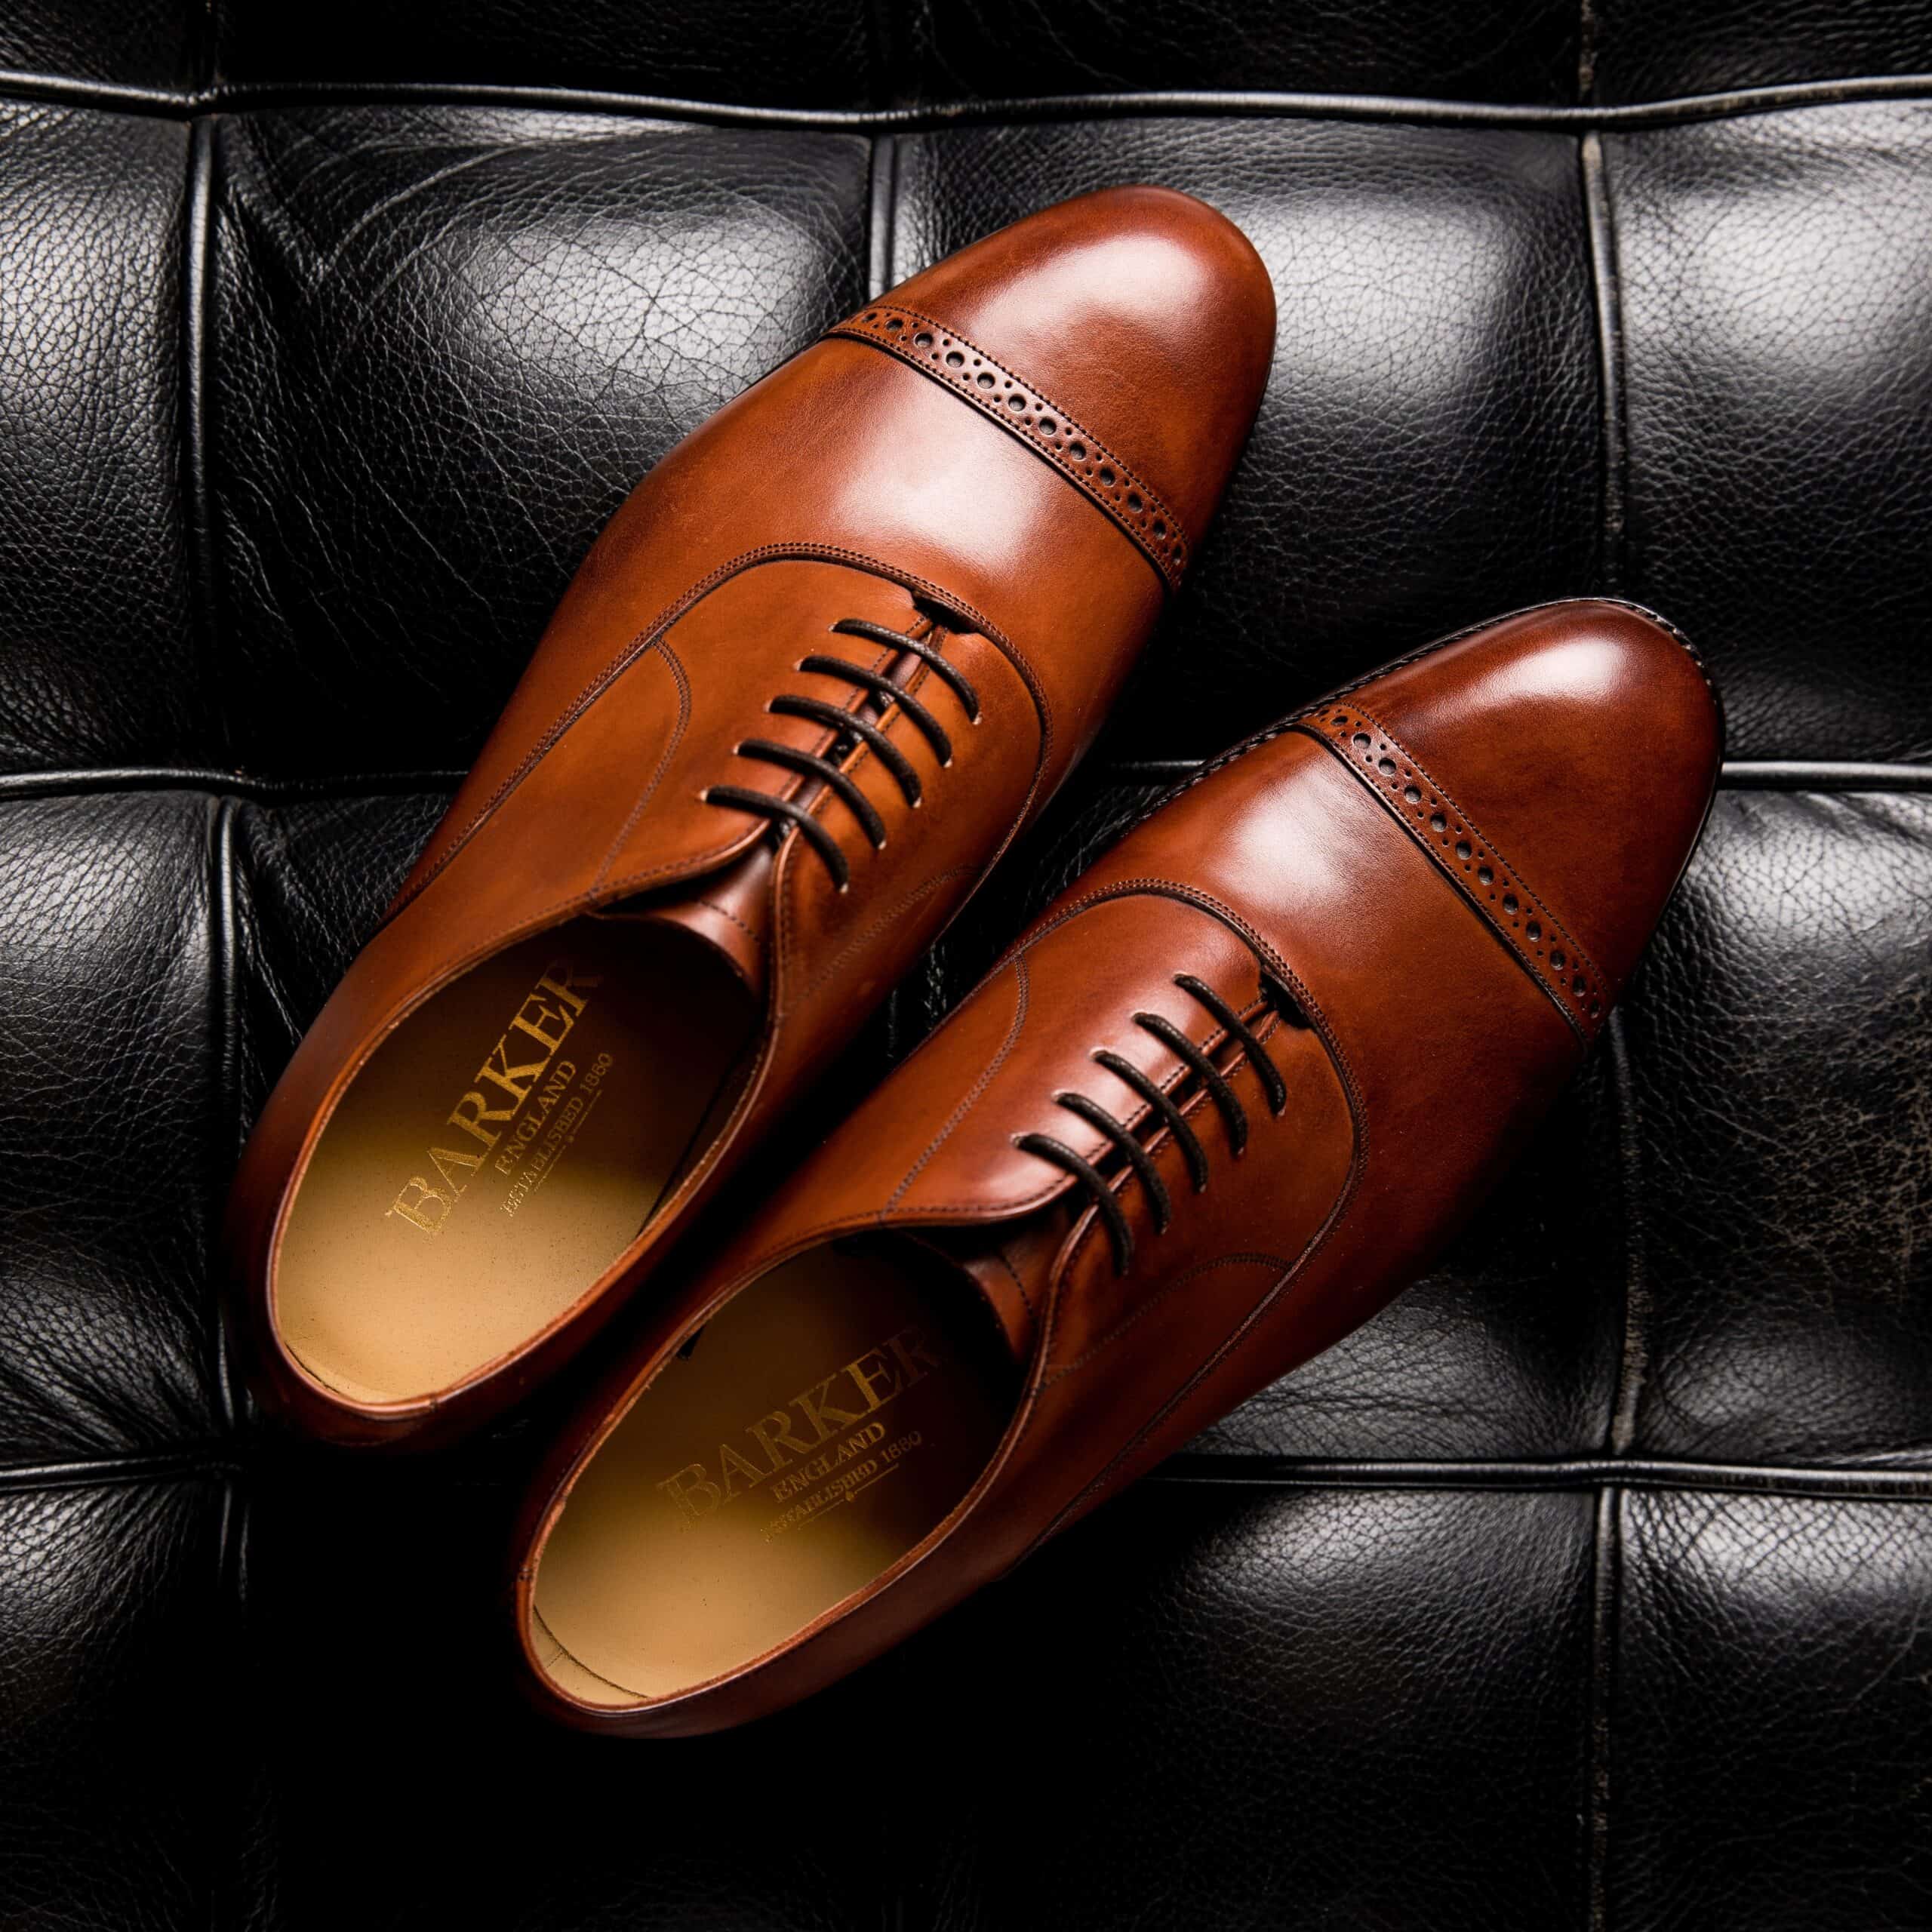 Oxfords Vs. Derbys: What’s The Difference Between The Two?